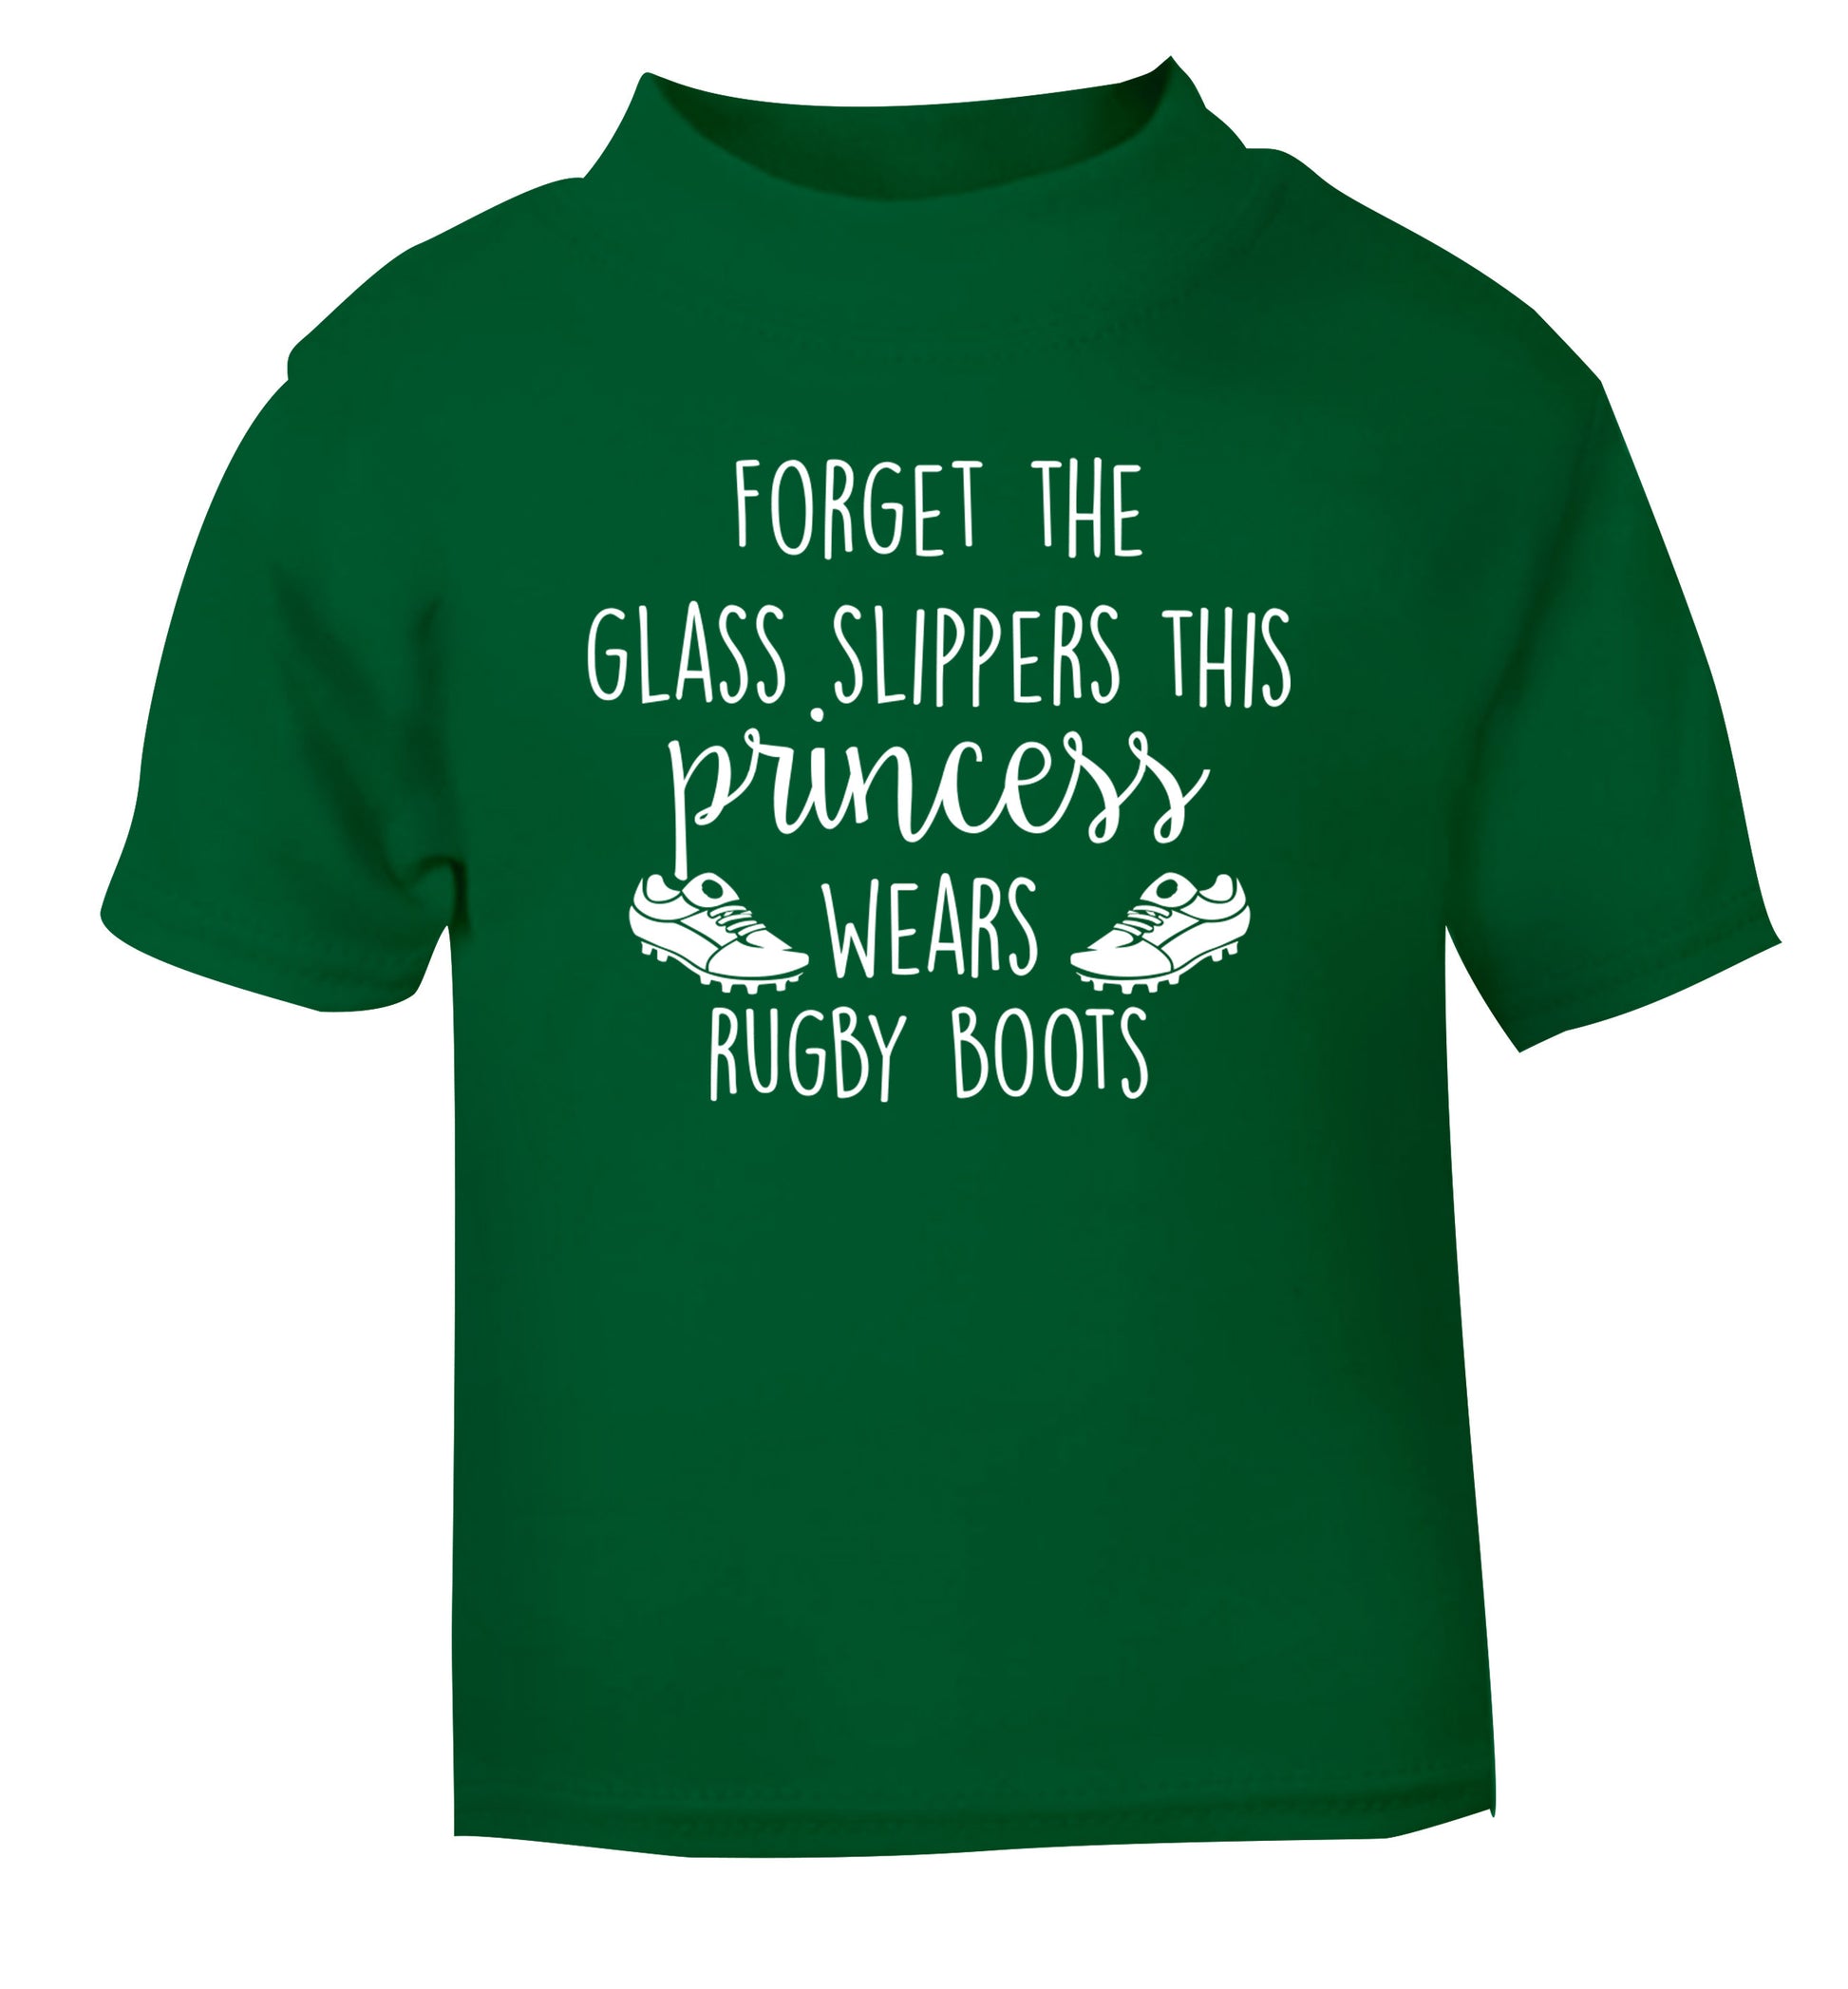 Forget the glass slippers this princess wears rugby boots green Baby Toddler Tshirt 2 Years